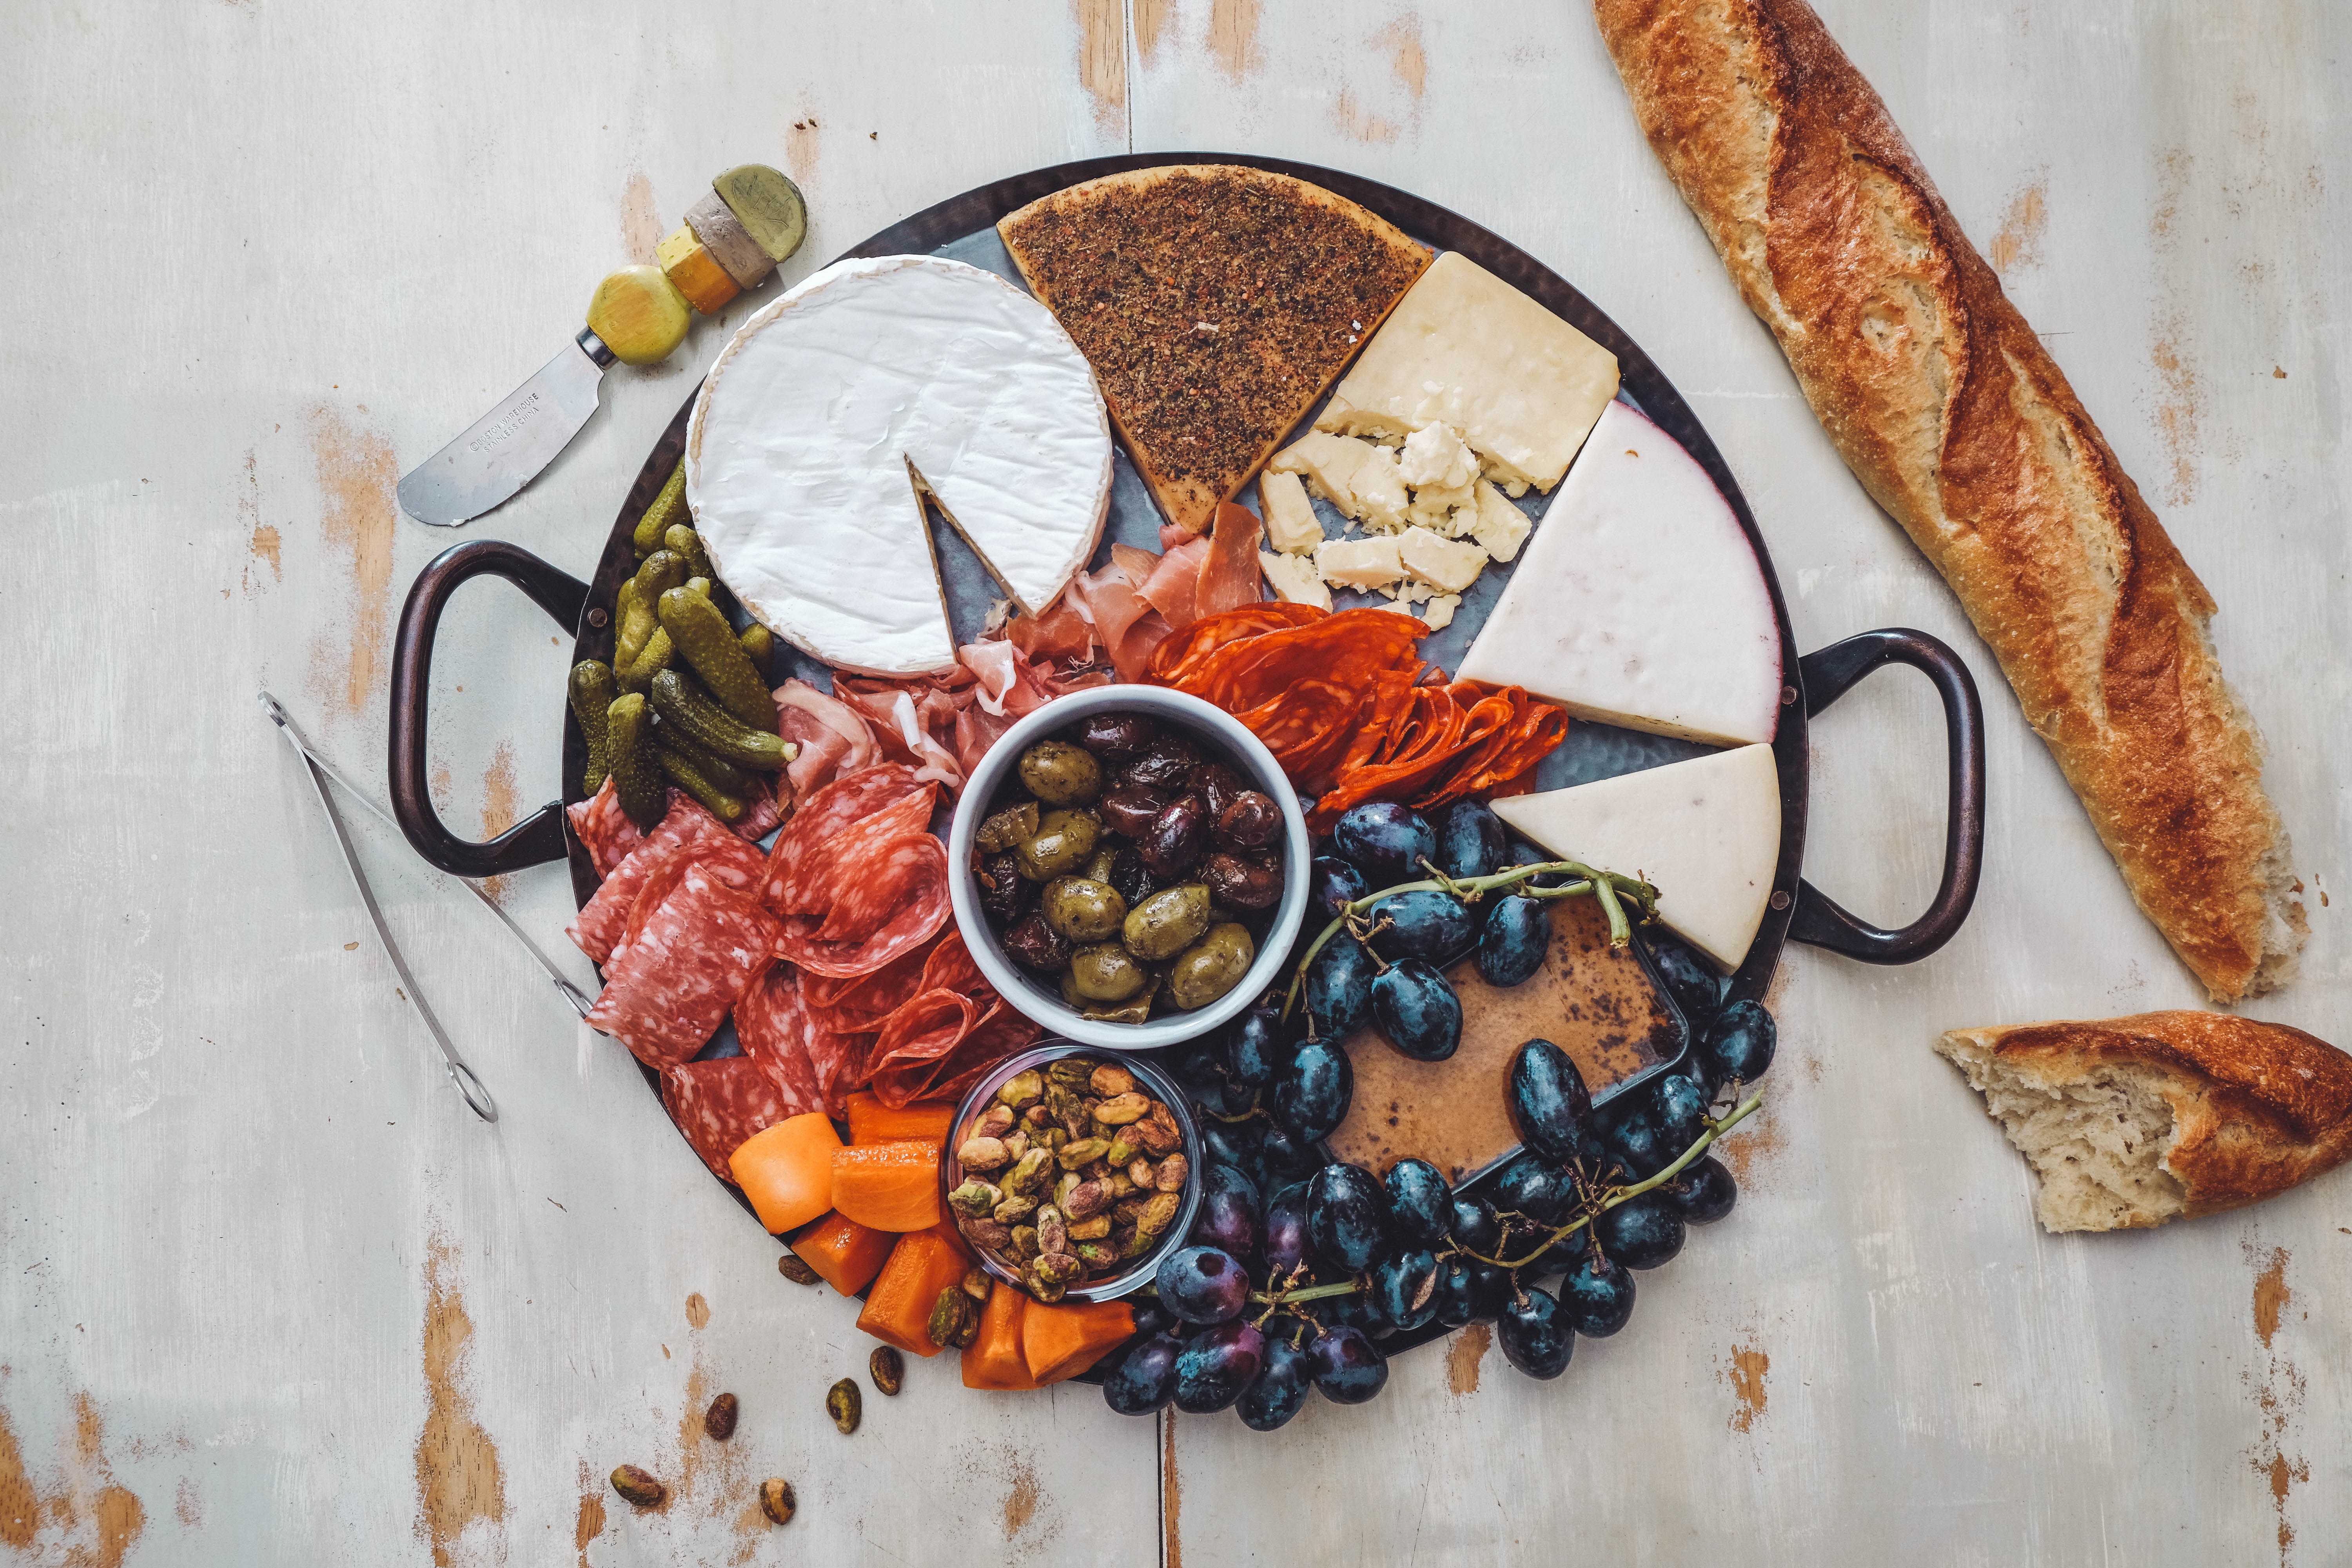 General 6000x4000 food pickles bread fruit cheese olives pistachios grapes brie still life salami knife closeup top view